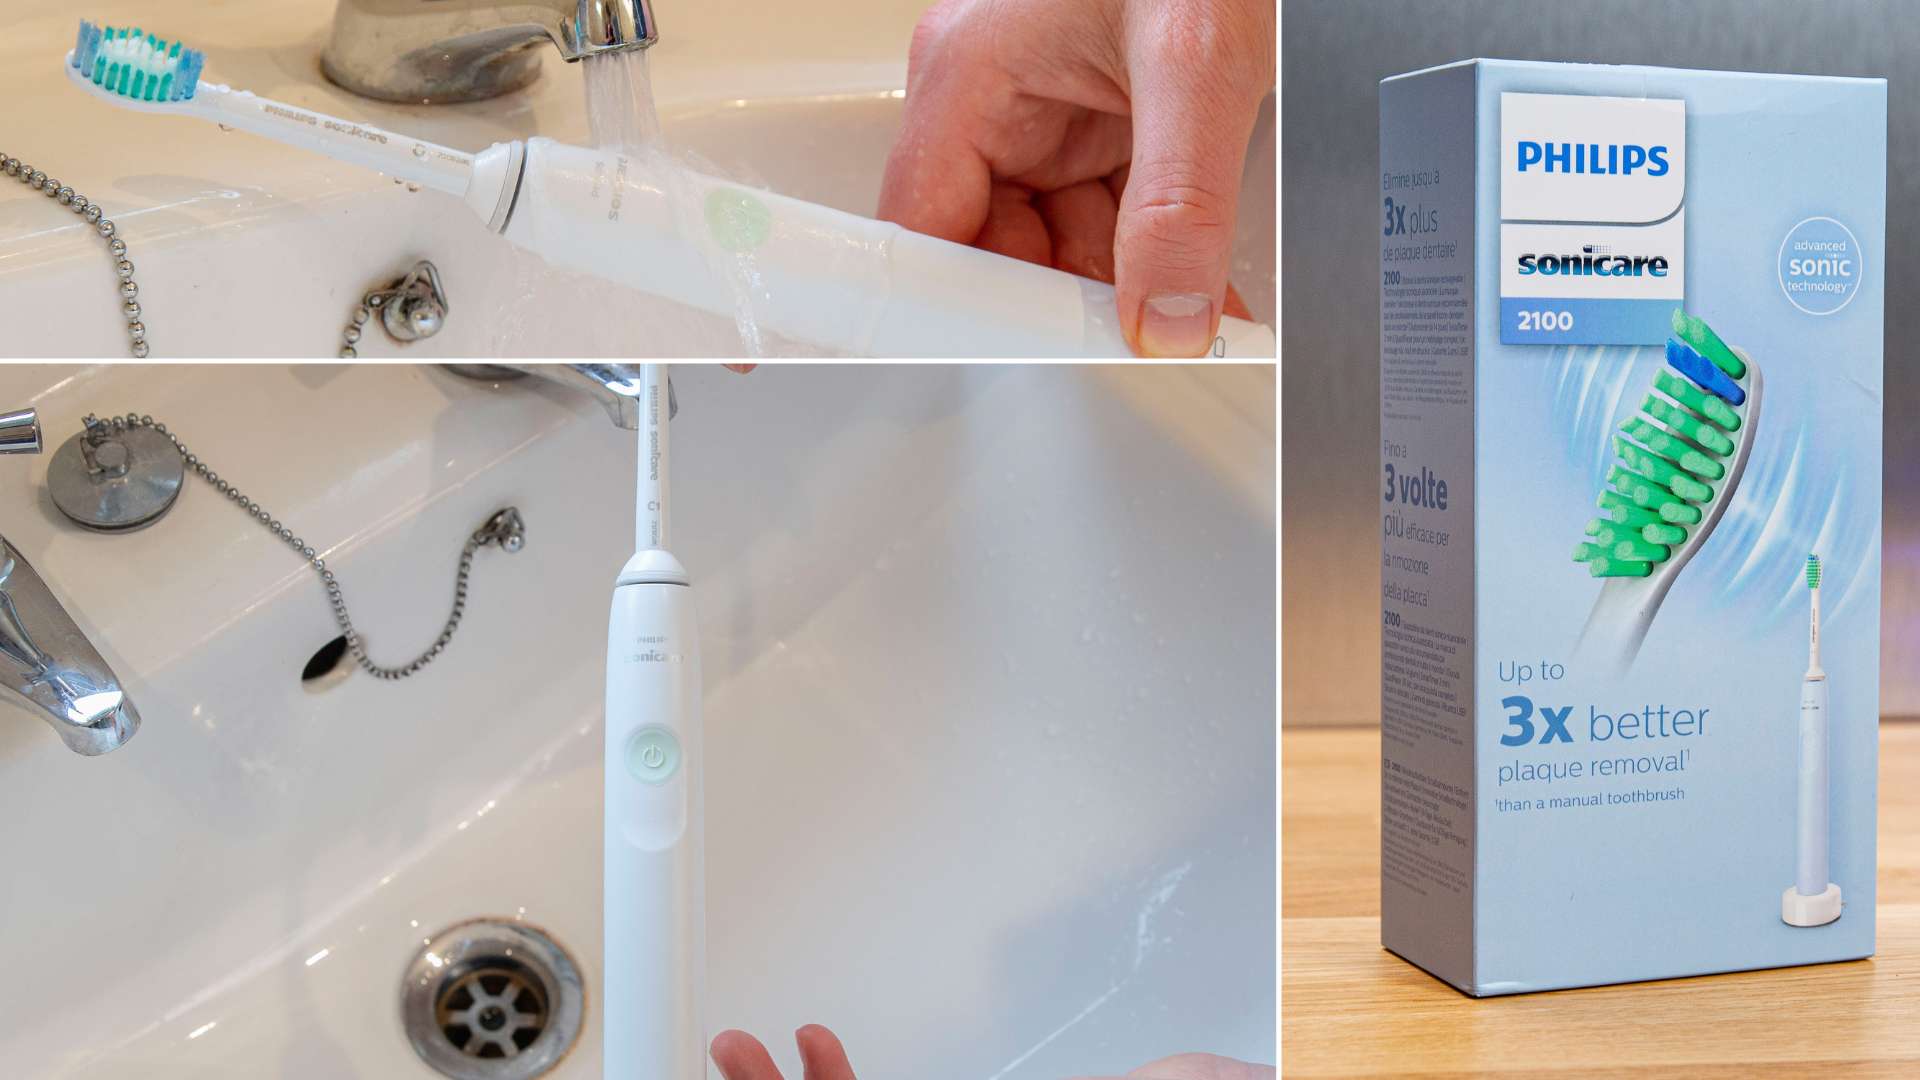 Sonicare 2100 toothbrush